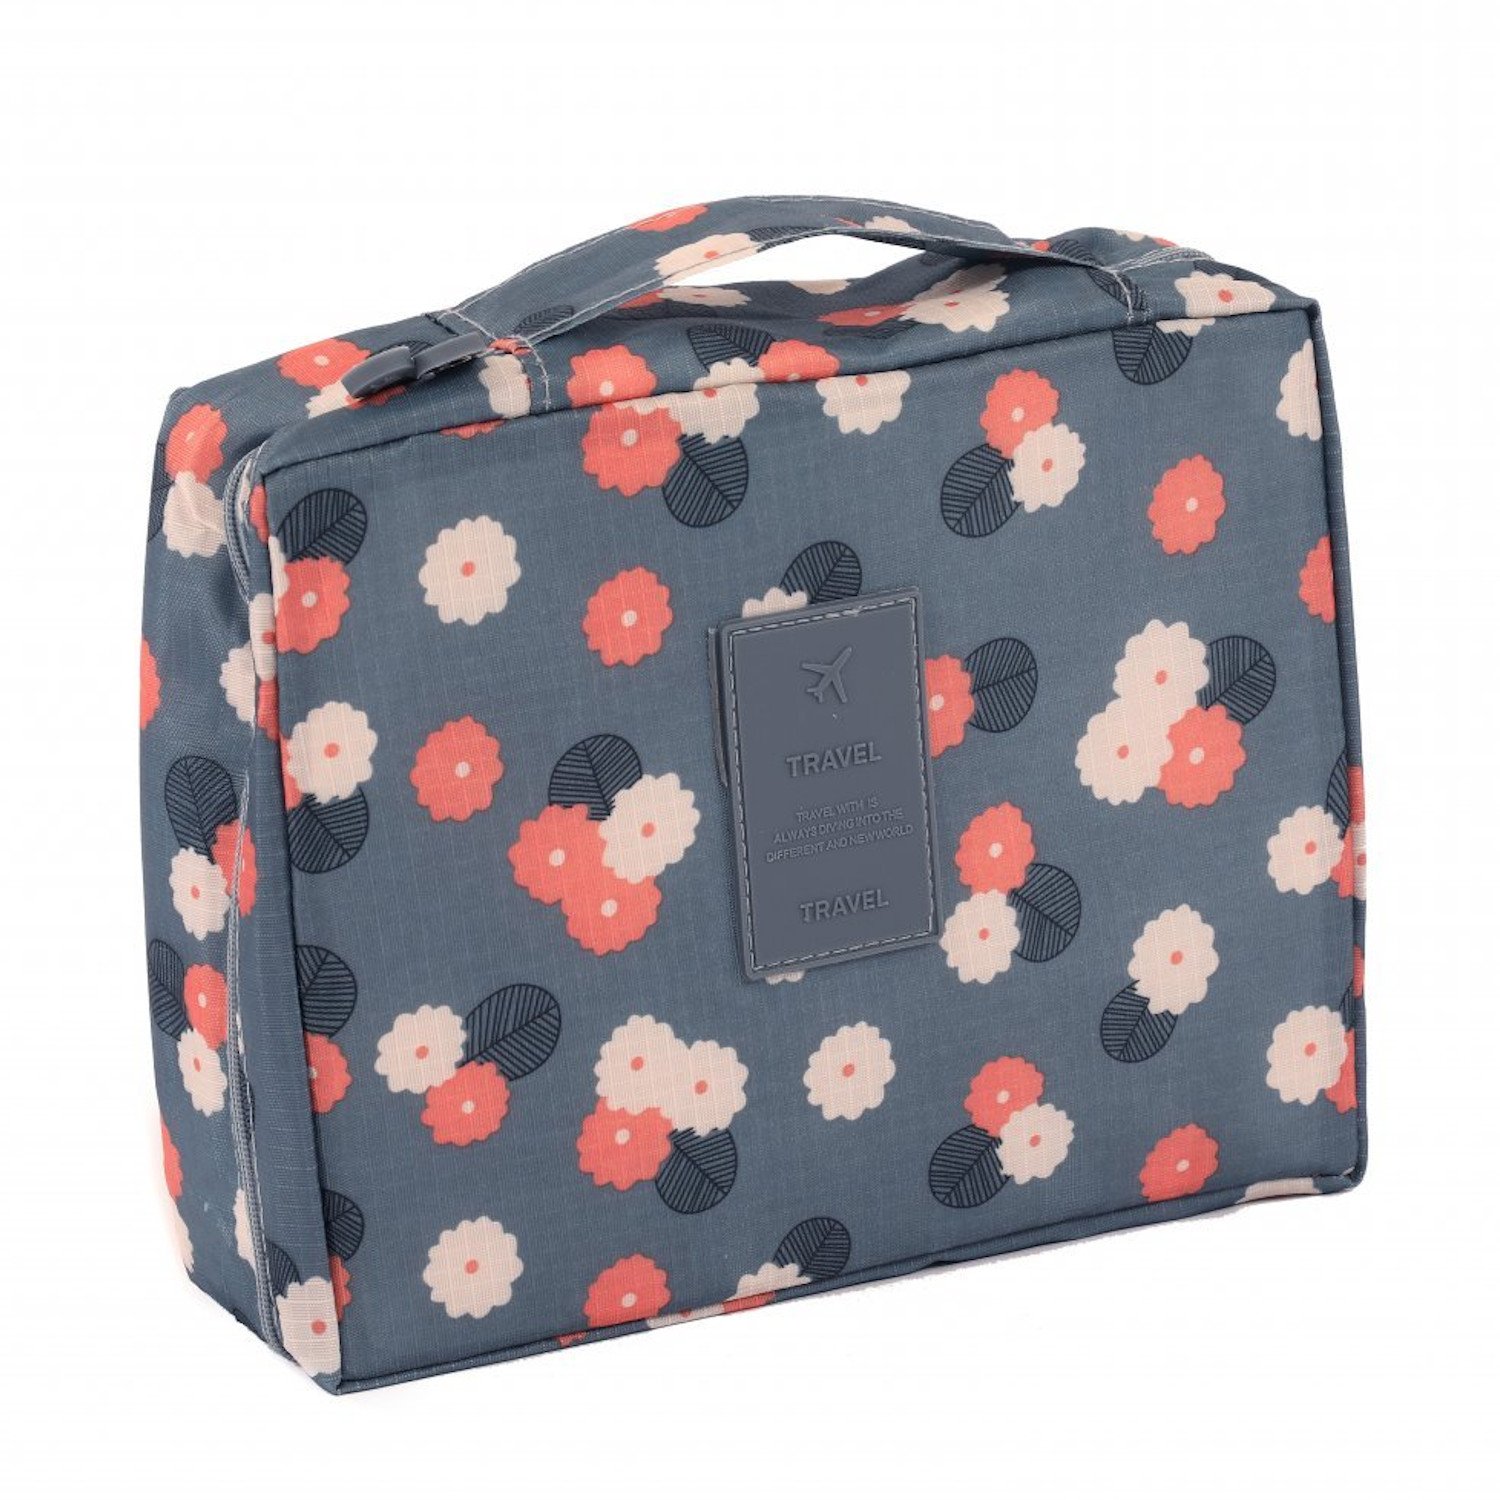 Blue Flower Patterned Cosmetic Make-Up Travel Bag Pouch Luggage Organiser